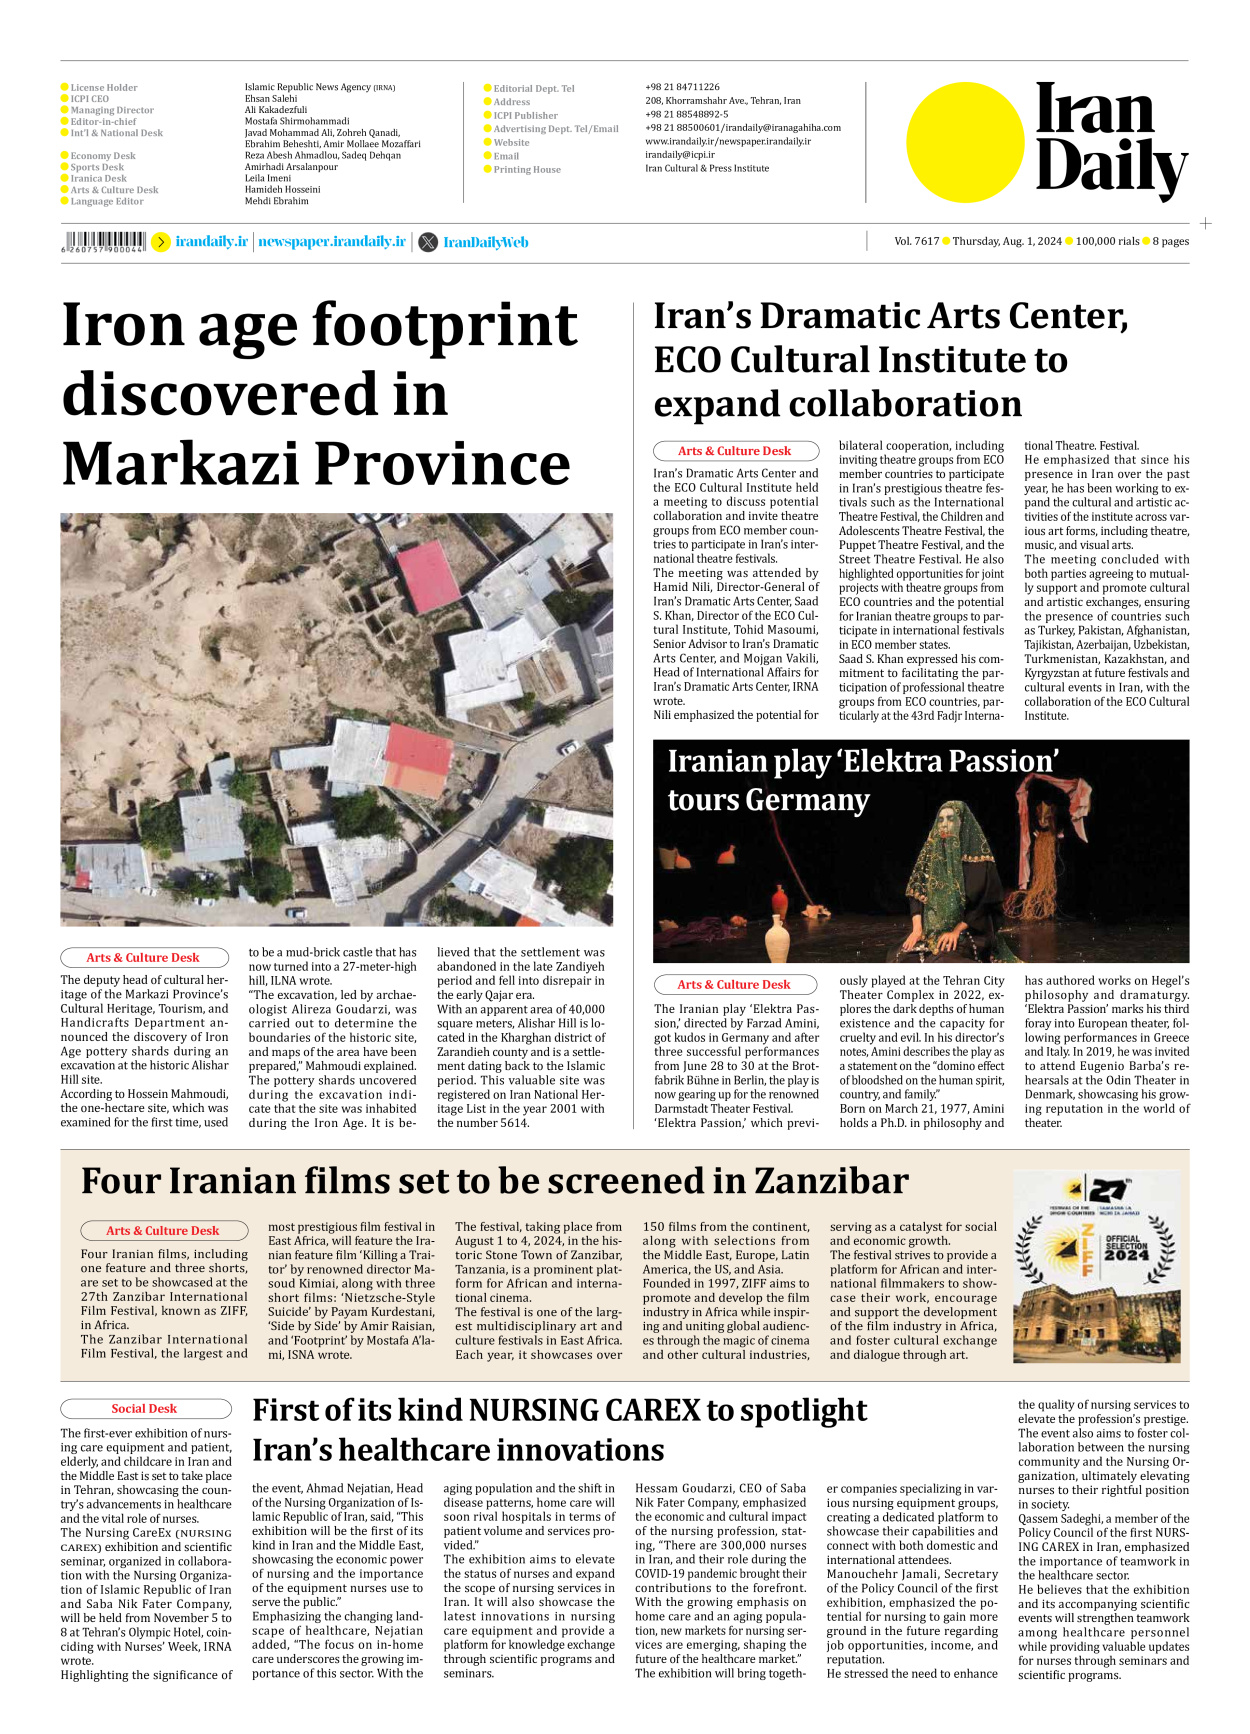 Iran Daily - Number Seven Thousand Six Hundred and Seventeen - 01 August 2024 - Page 8